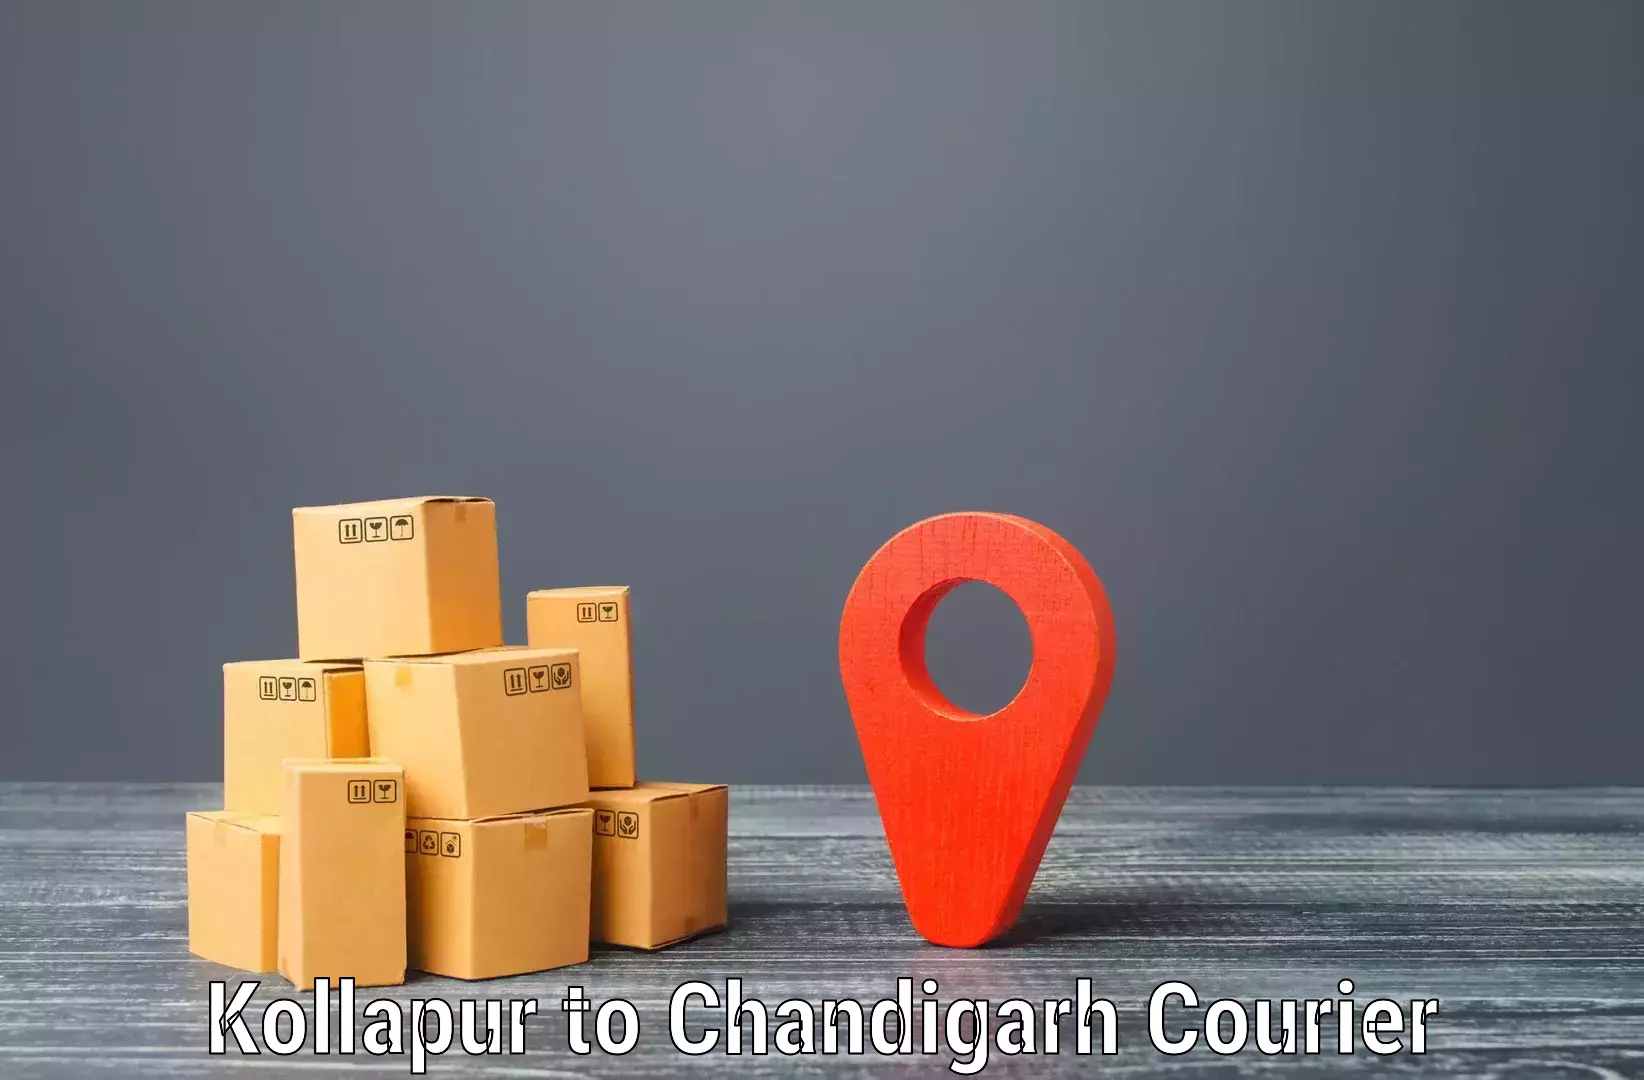 Online package tracking Kollapur to Chandigarh